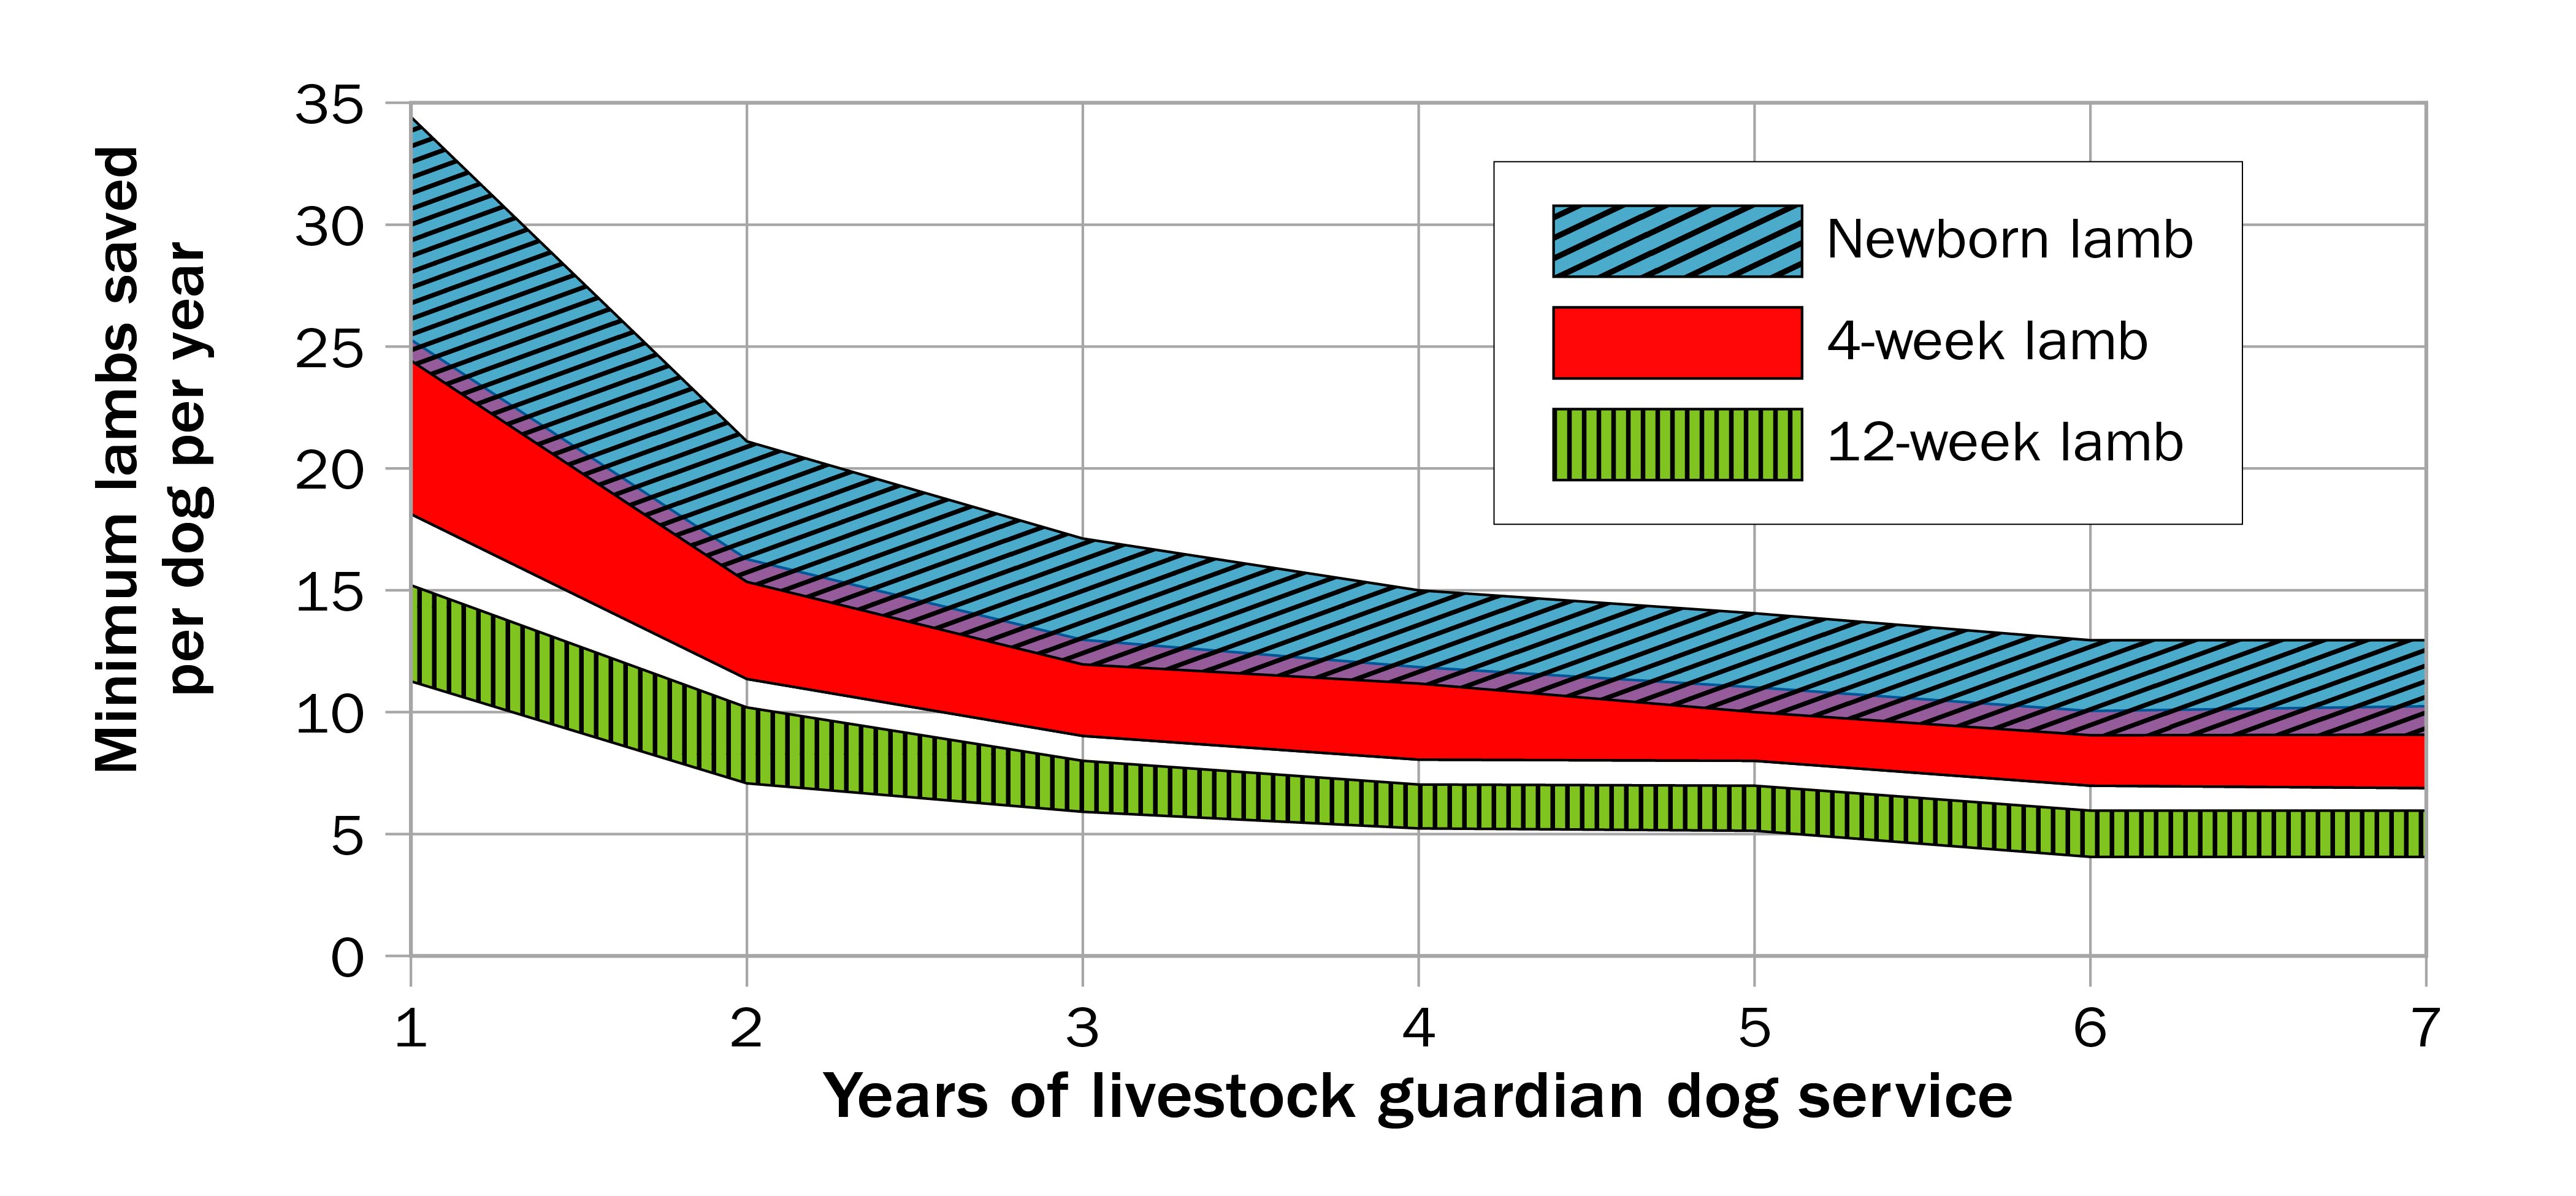 Line graph showing minimum number of lambs saved per dog per year required to be an economic asset based on years of livestock guardian dog service and lamb value. Six lines are drawn newborn (low), newborn (high), 4-week (low), 4-week (high), 12-week (low) and 12-week (high).